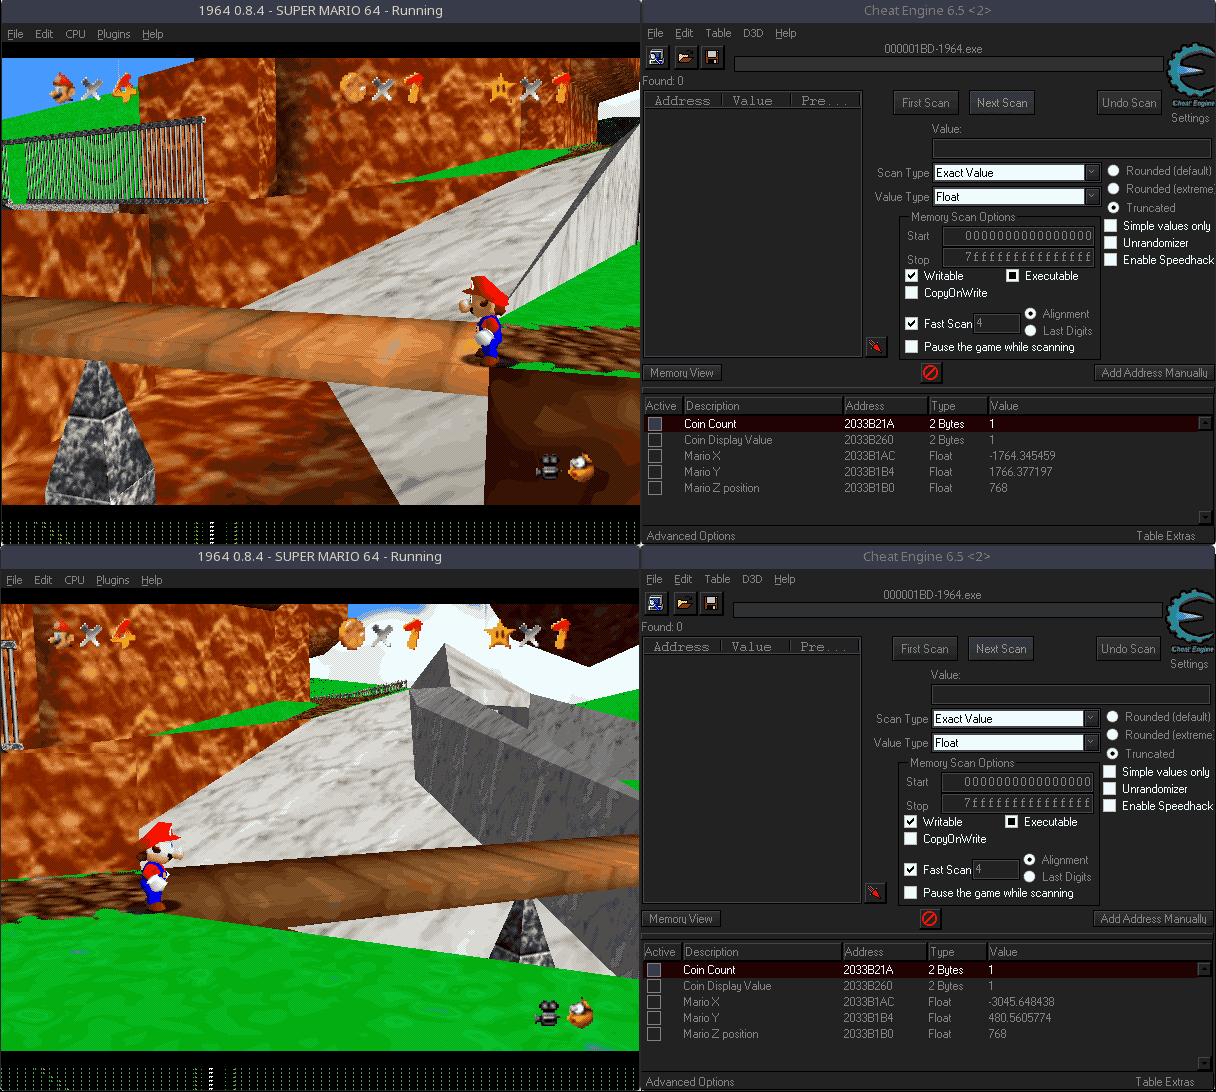 Cheat Engine before/after screenshot